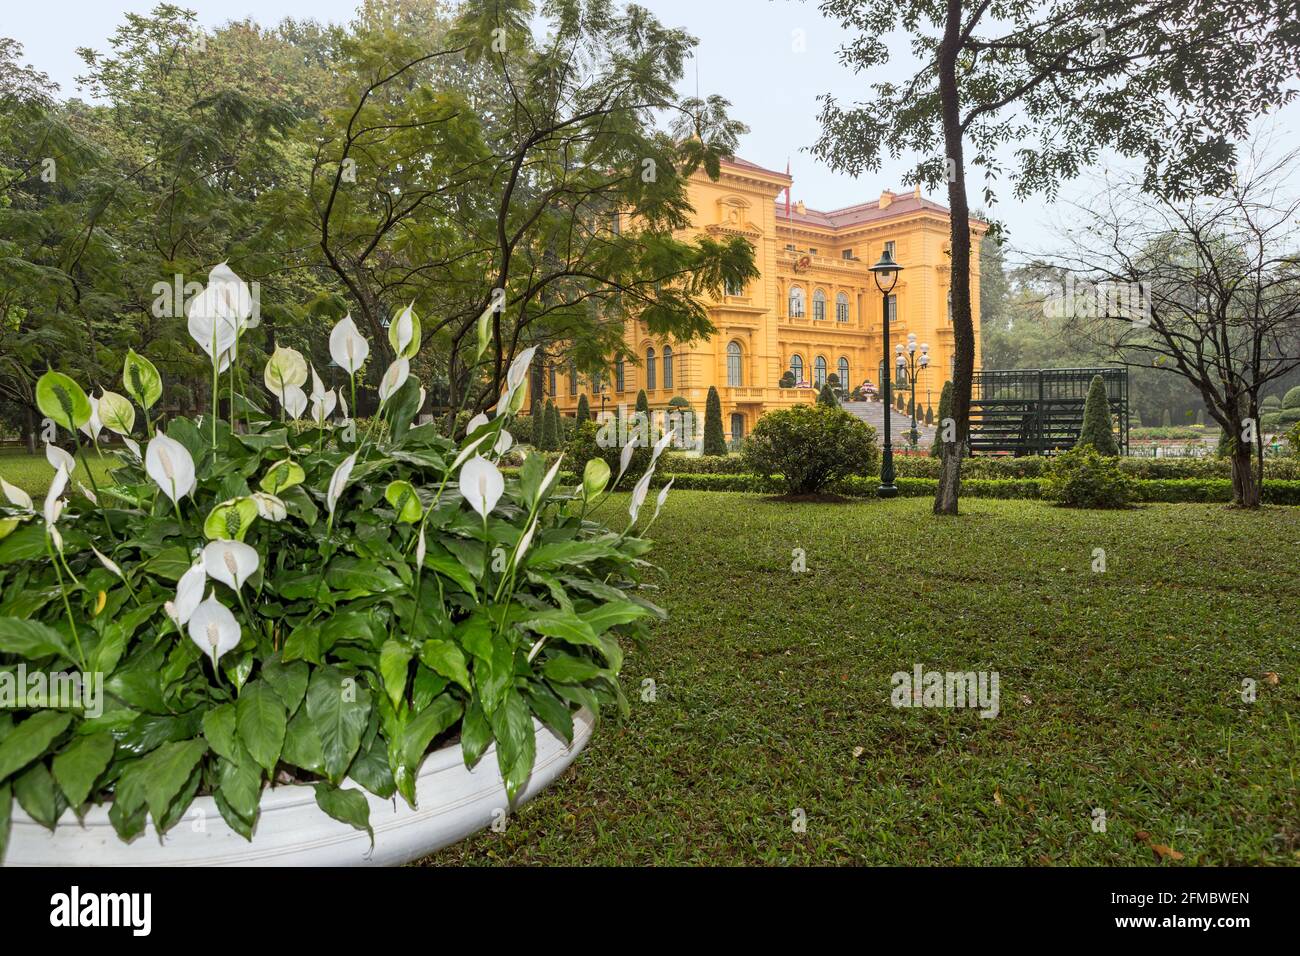 Presidential Palace with Peace Lillies, Spathiphyllum, Ho Chi Minh Complex, Hanoi, Vietnam Stock Photo